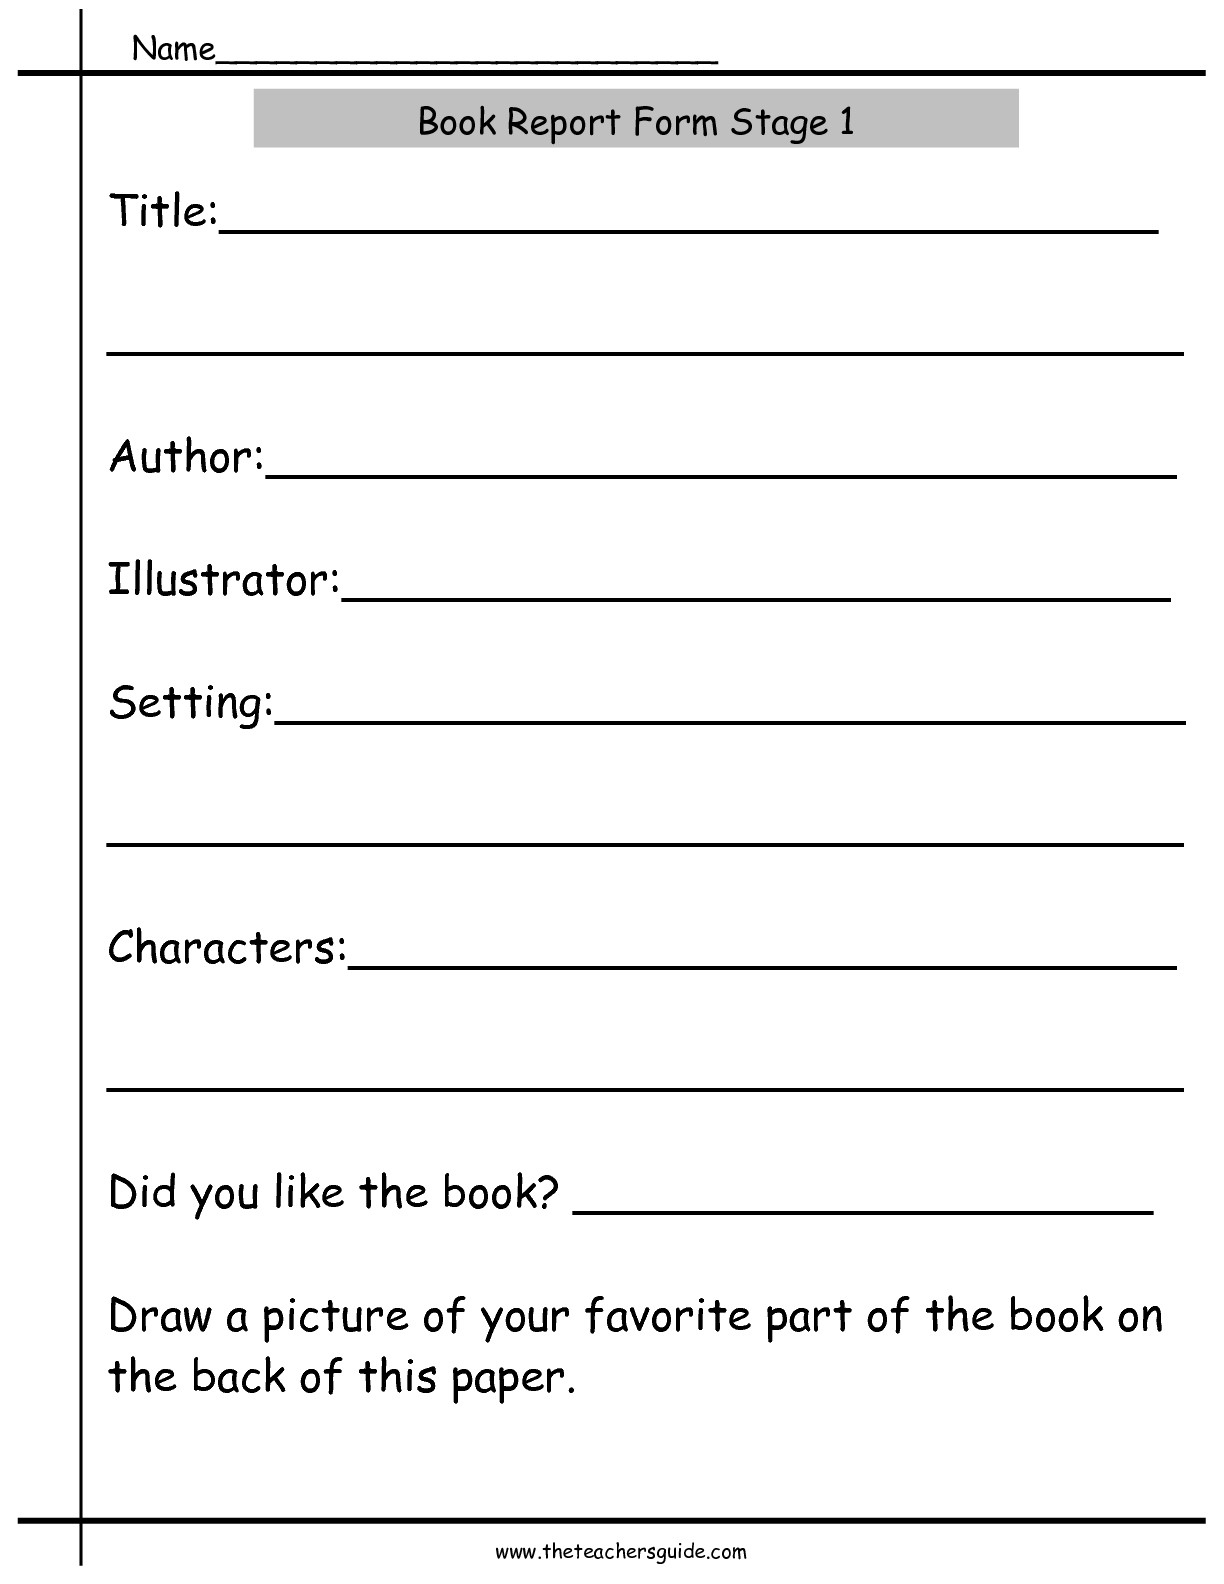 Book Report Worksheets From The Teacher&amp;#039;s Guide - Free Printable Book Report Forms